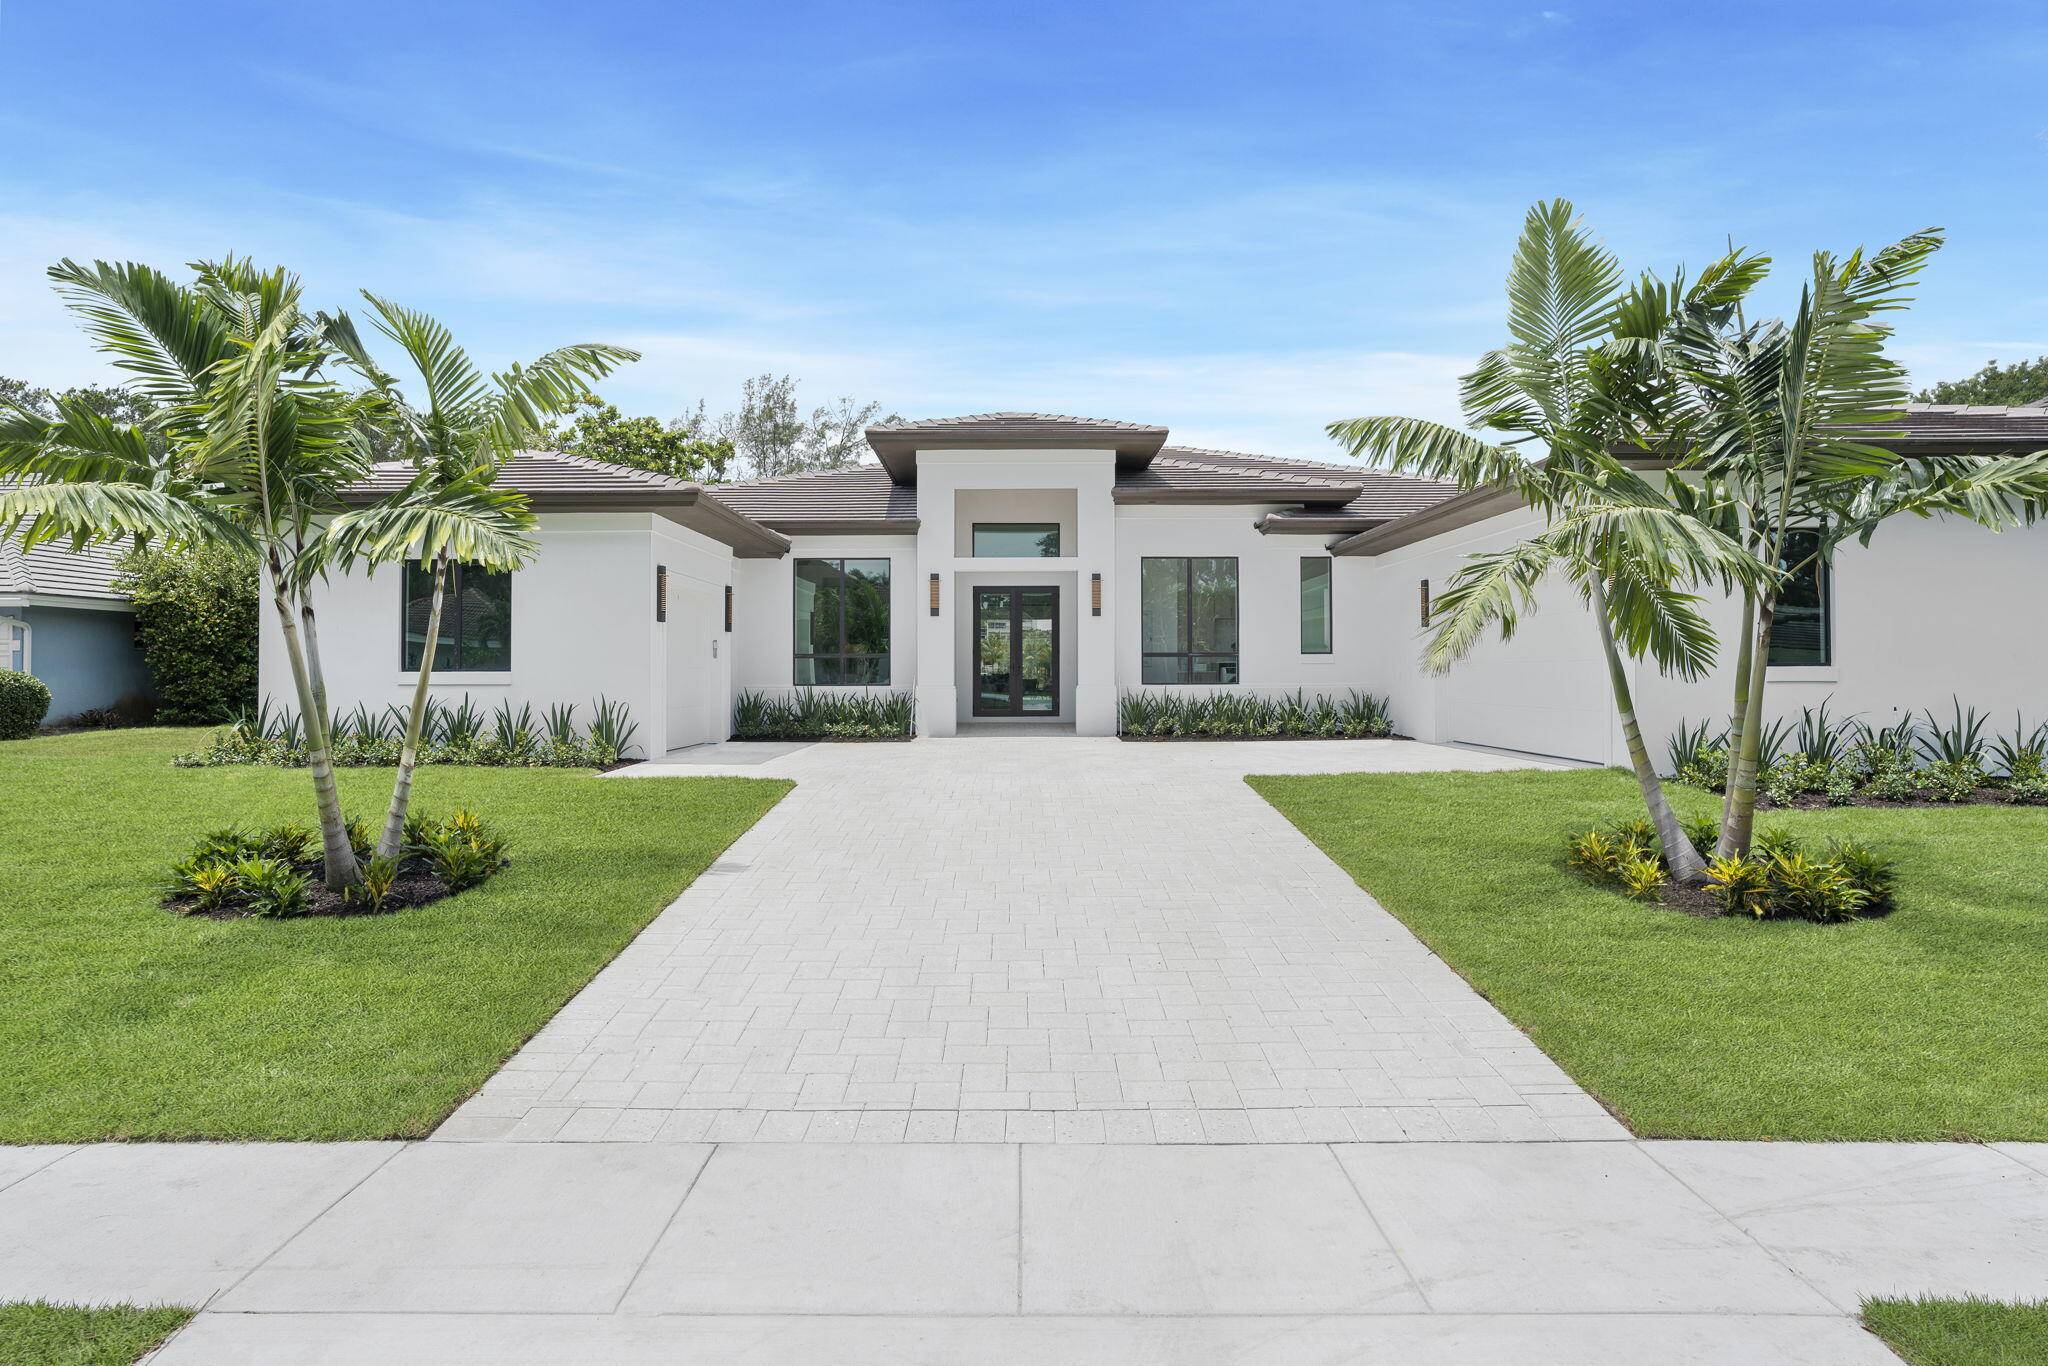 This new construction modern ranch home by Sam Fisch Development features 6, 000 square feet of luxury living on a nearly 1 2 acre lot in the Lands of the ...